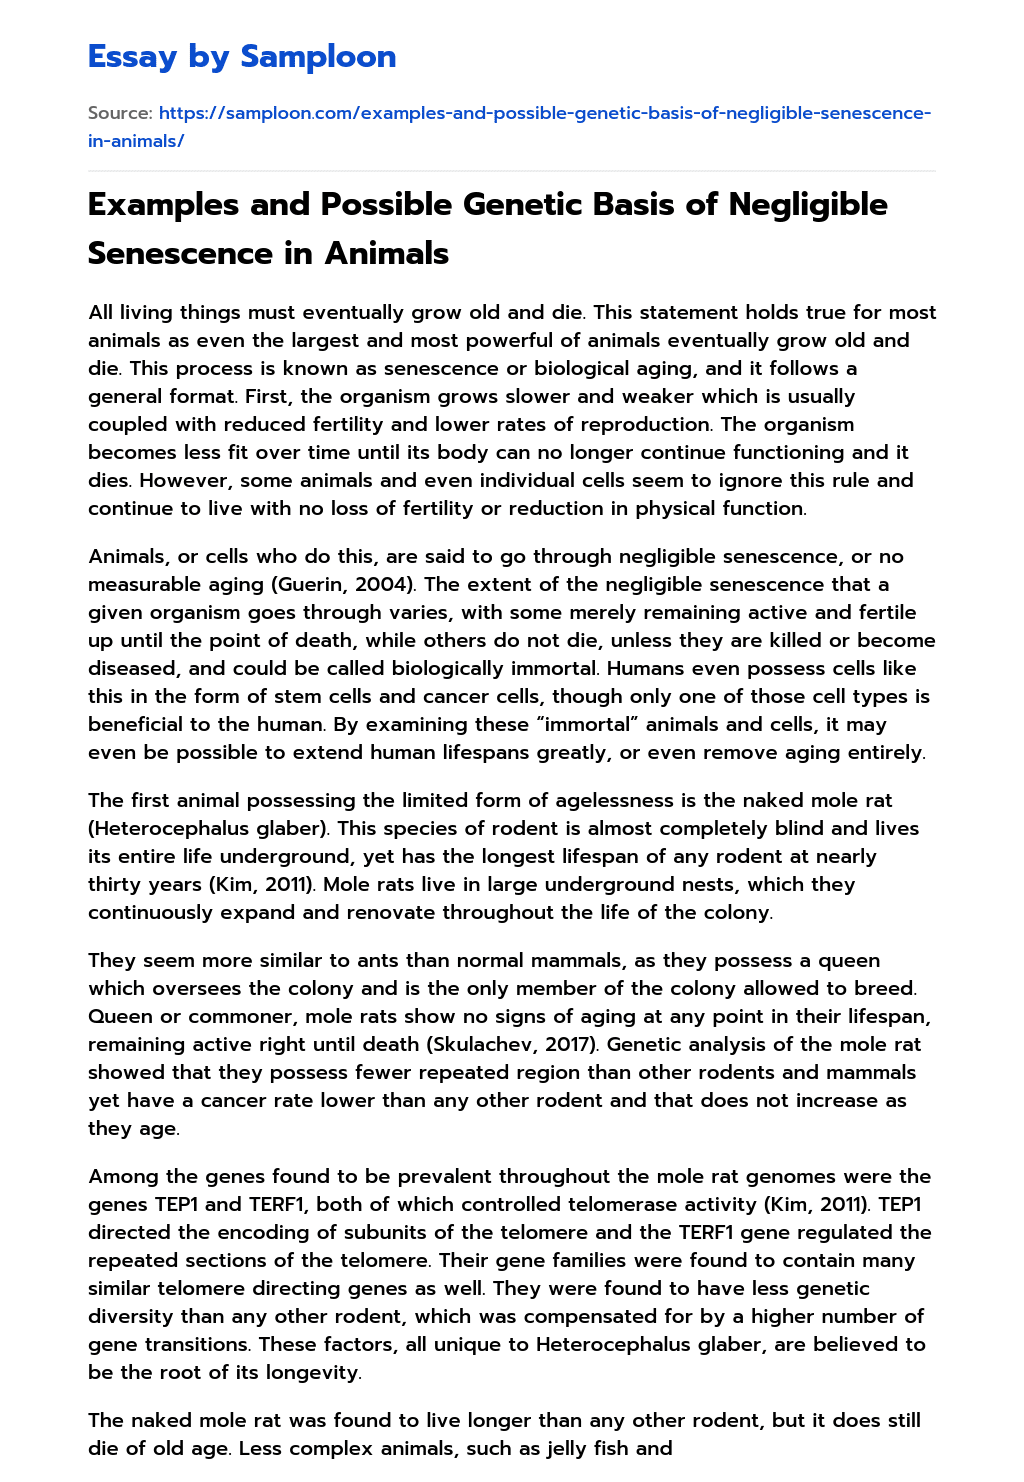 Examples and Possible Genetic Basis of Negligible Senescence in Animals essay